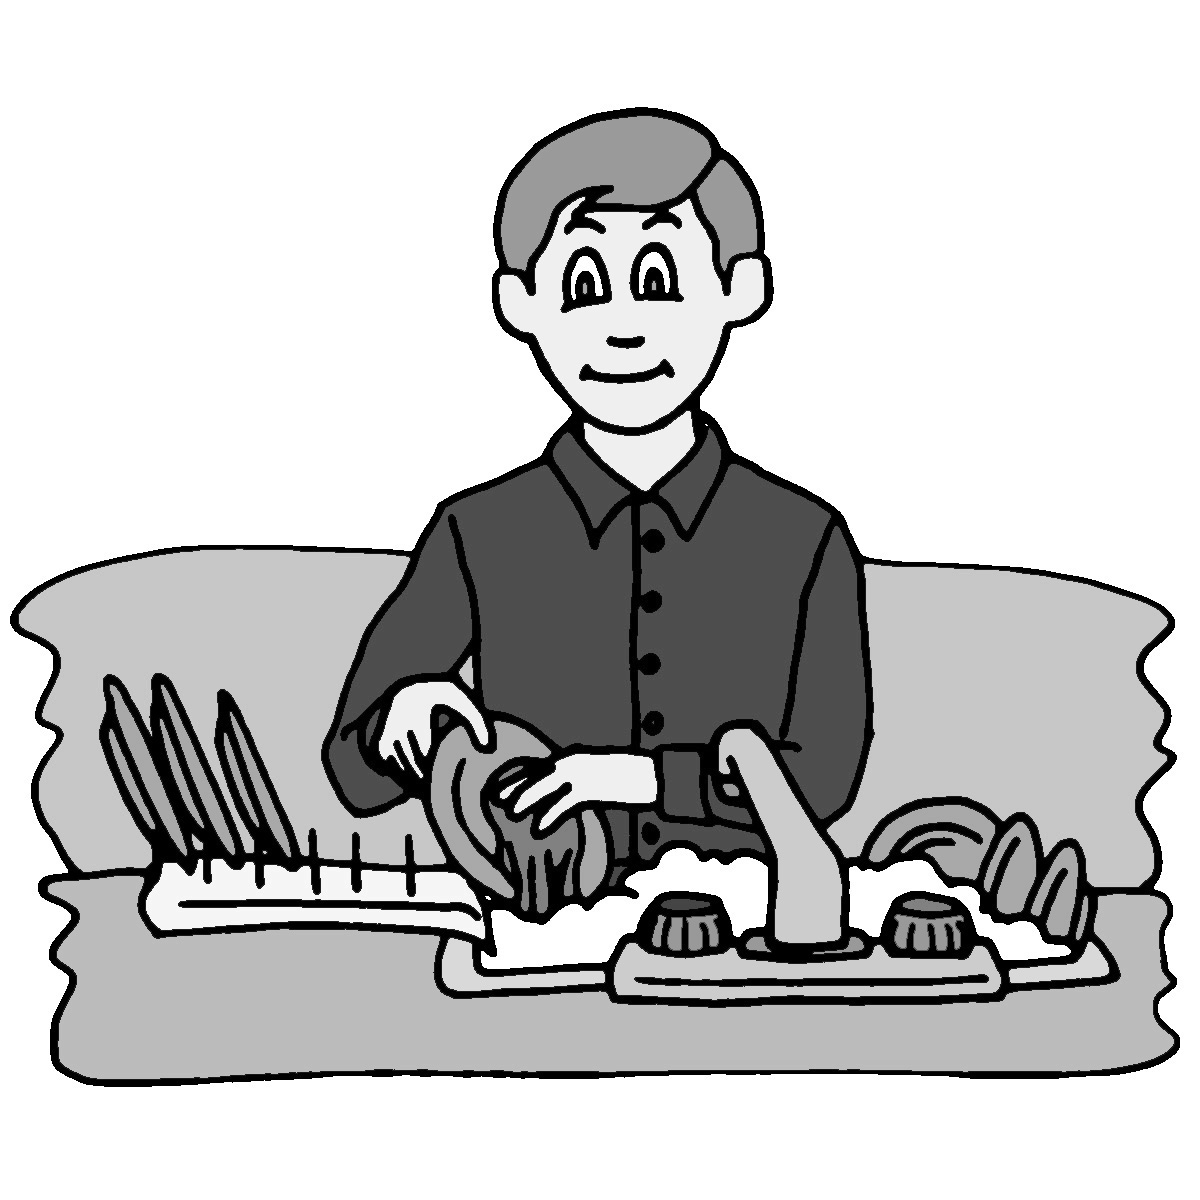 Clip Art  Kids  Chores  Washing The Dishes Grayscale